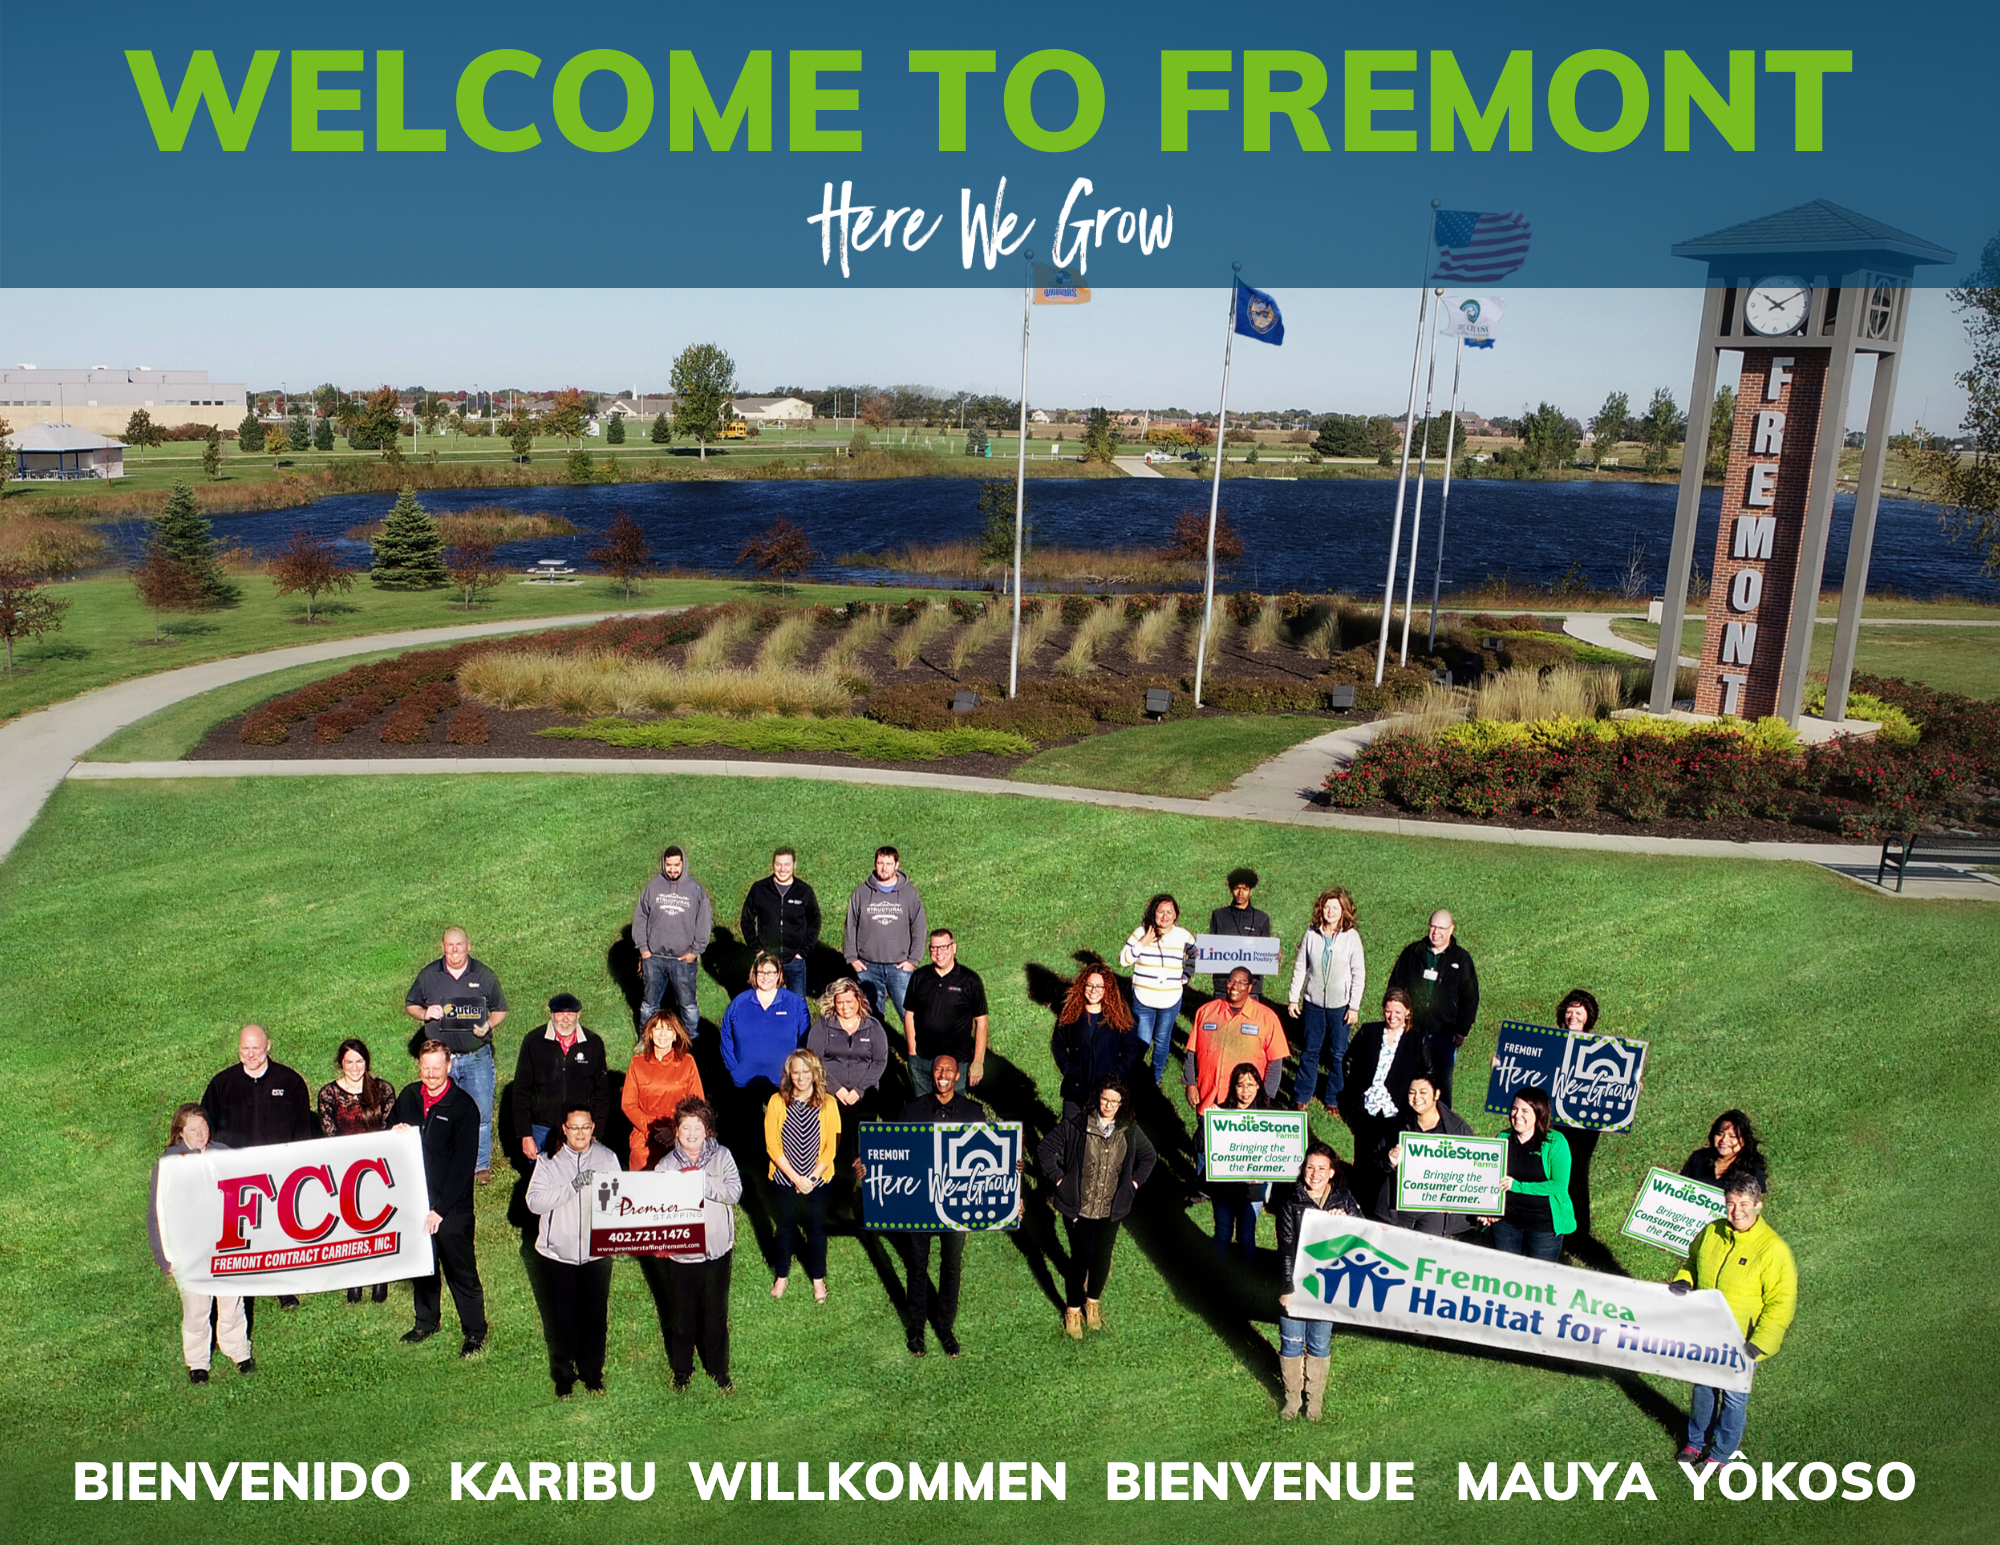 Fremont’s Multicultural Diversity and Inclusion Council Seeks to Make Fremont a Place Where Everyone Belongs Main Photo